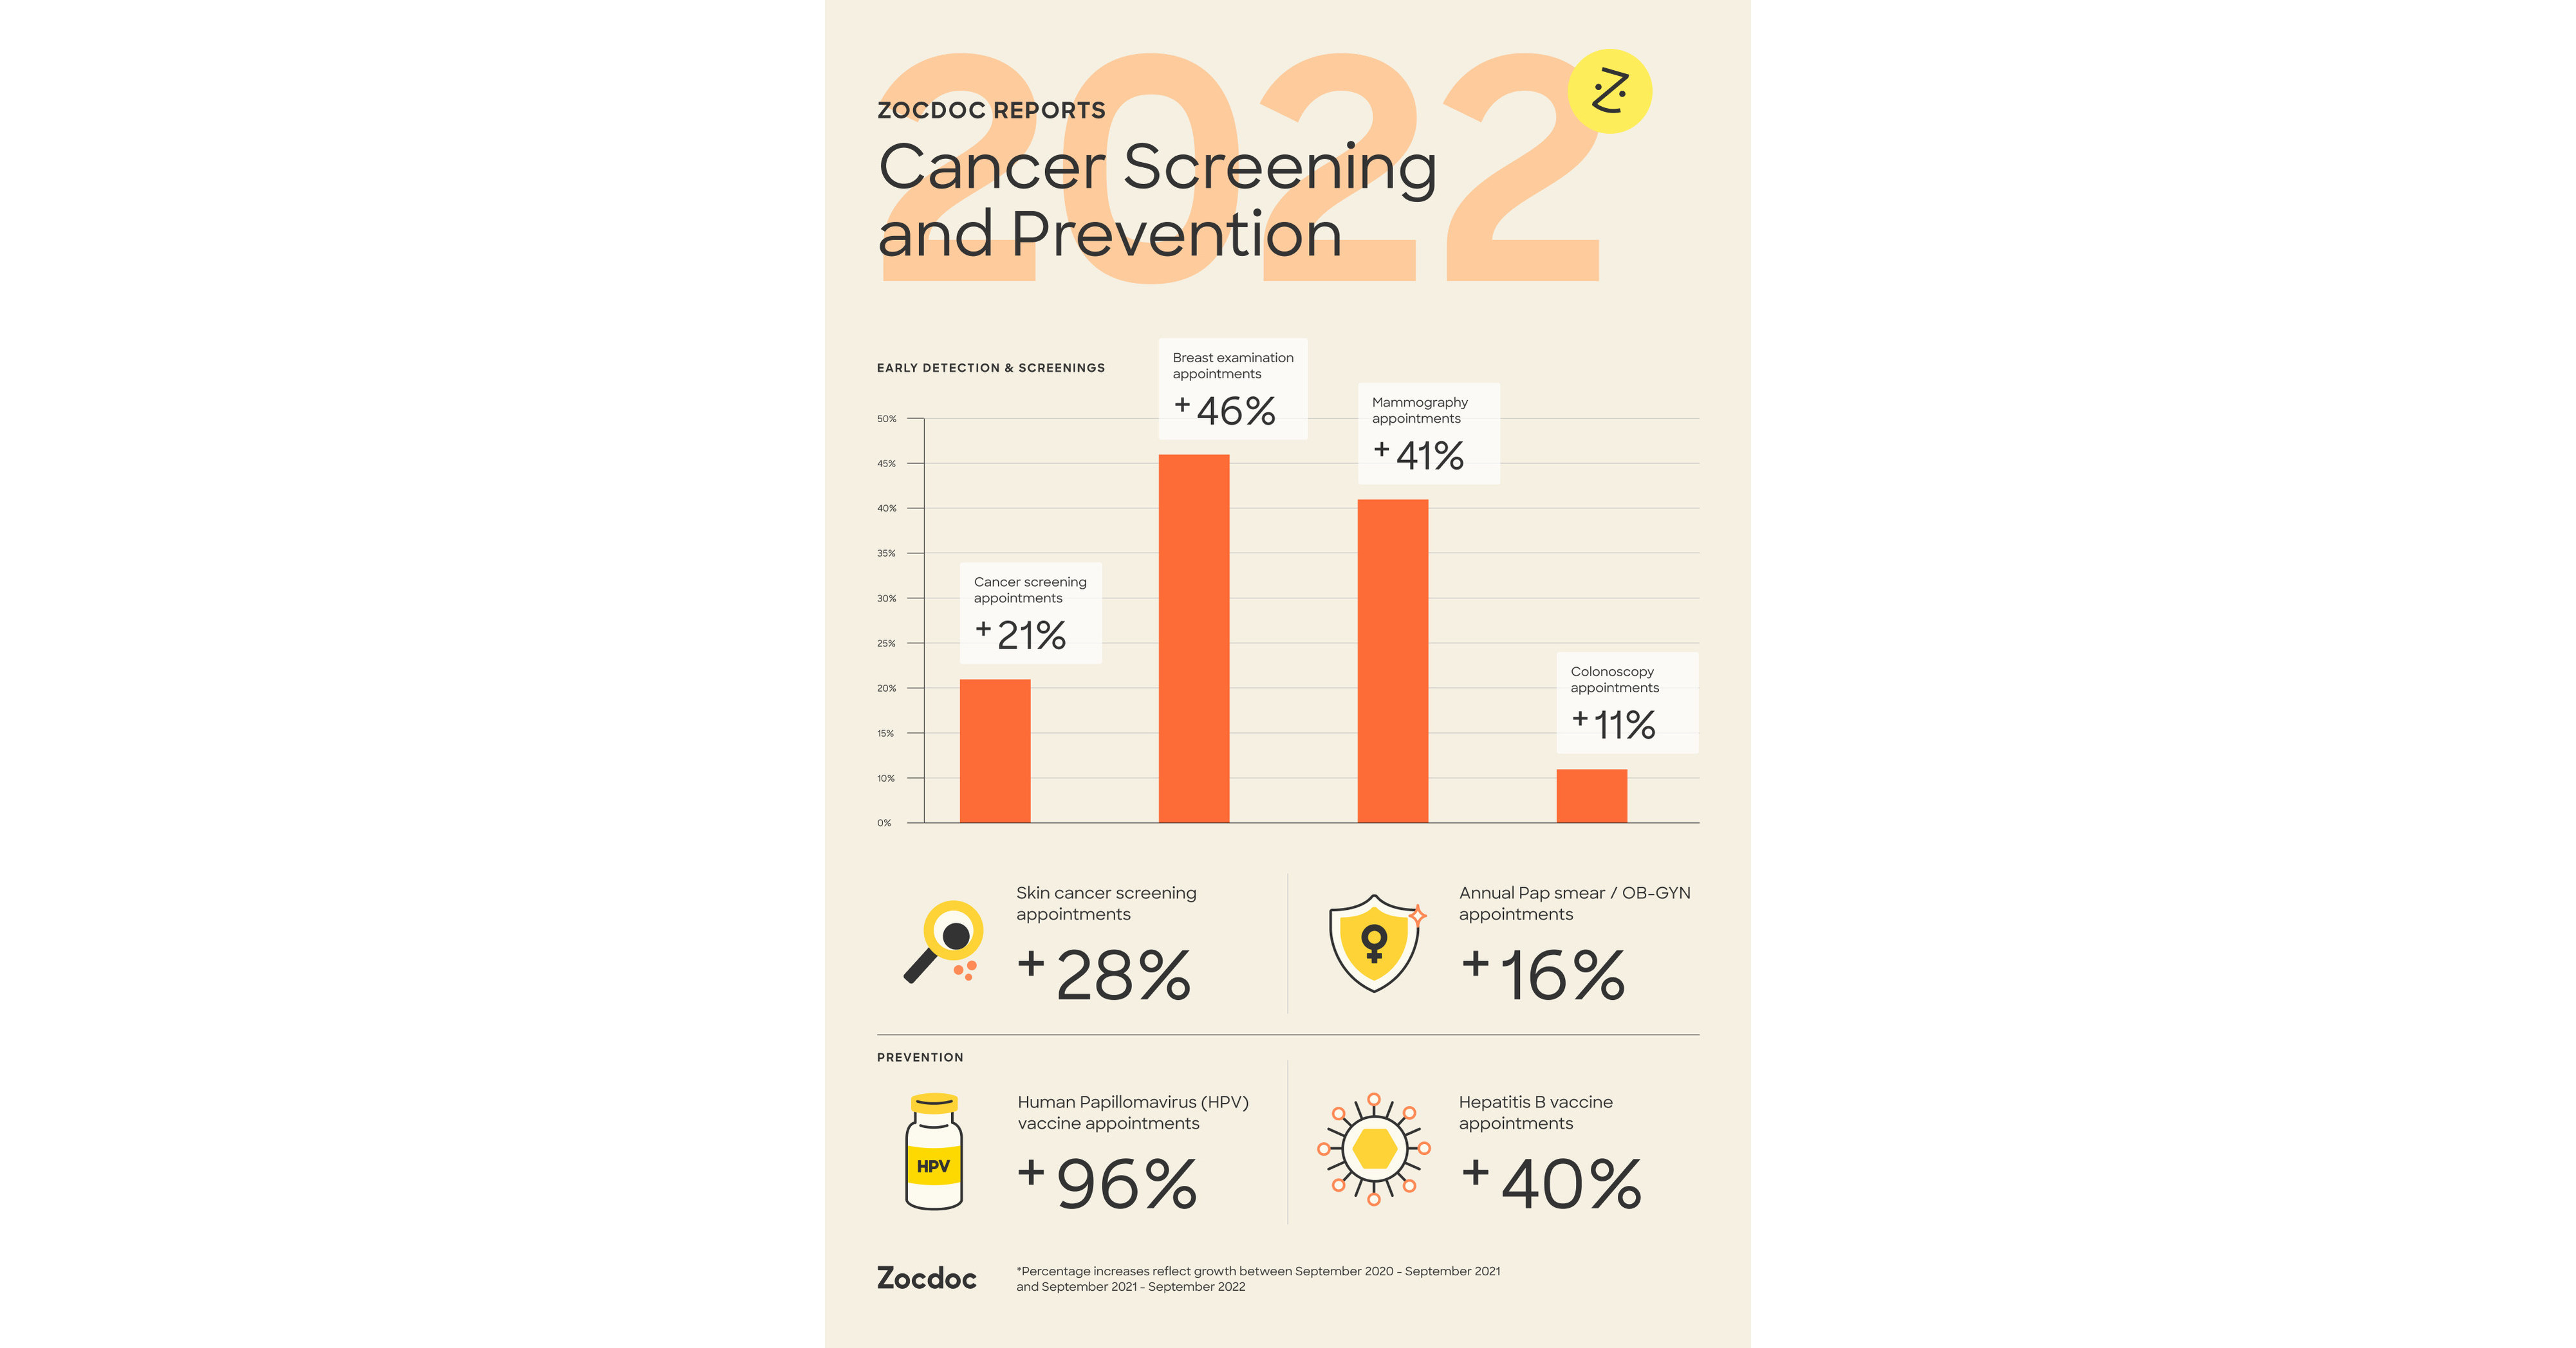 Zocdoc Reports: Cancer Screening and Prevention